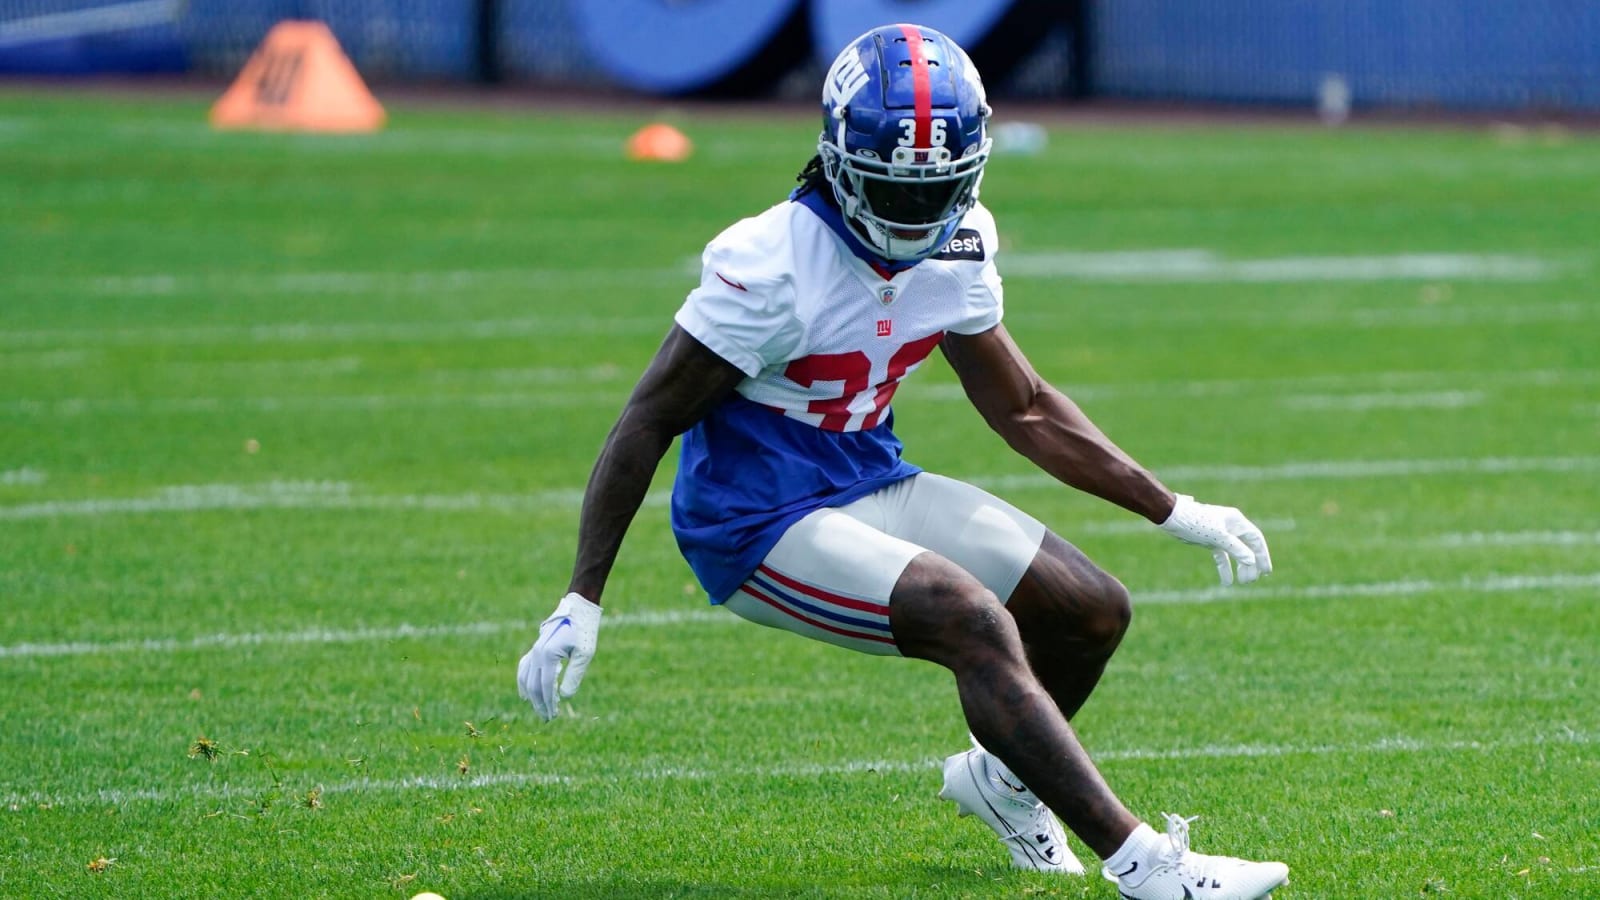 Giants rookie Deonte Banks describes ‘family-like’ culture that drew him to the team